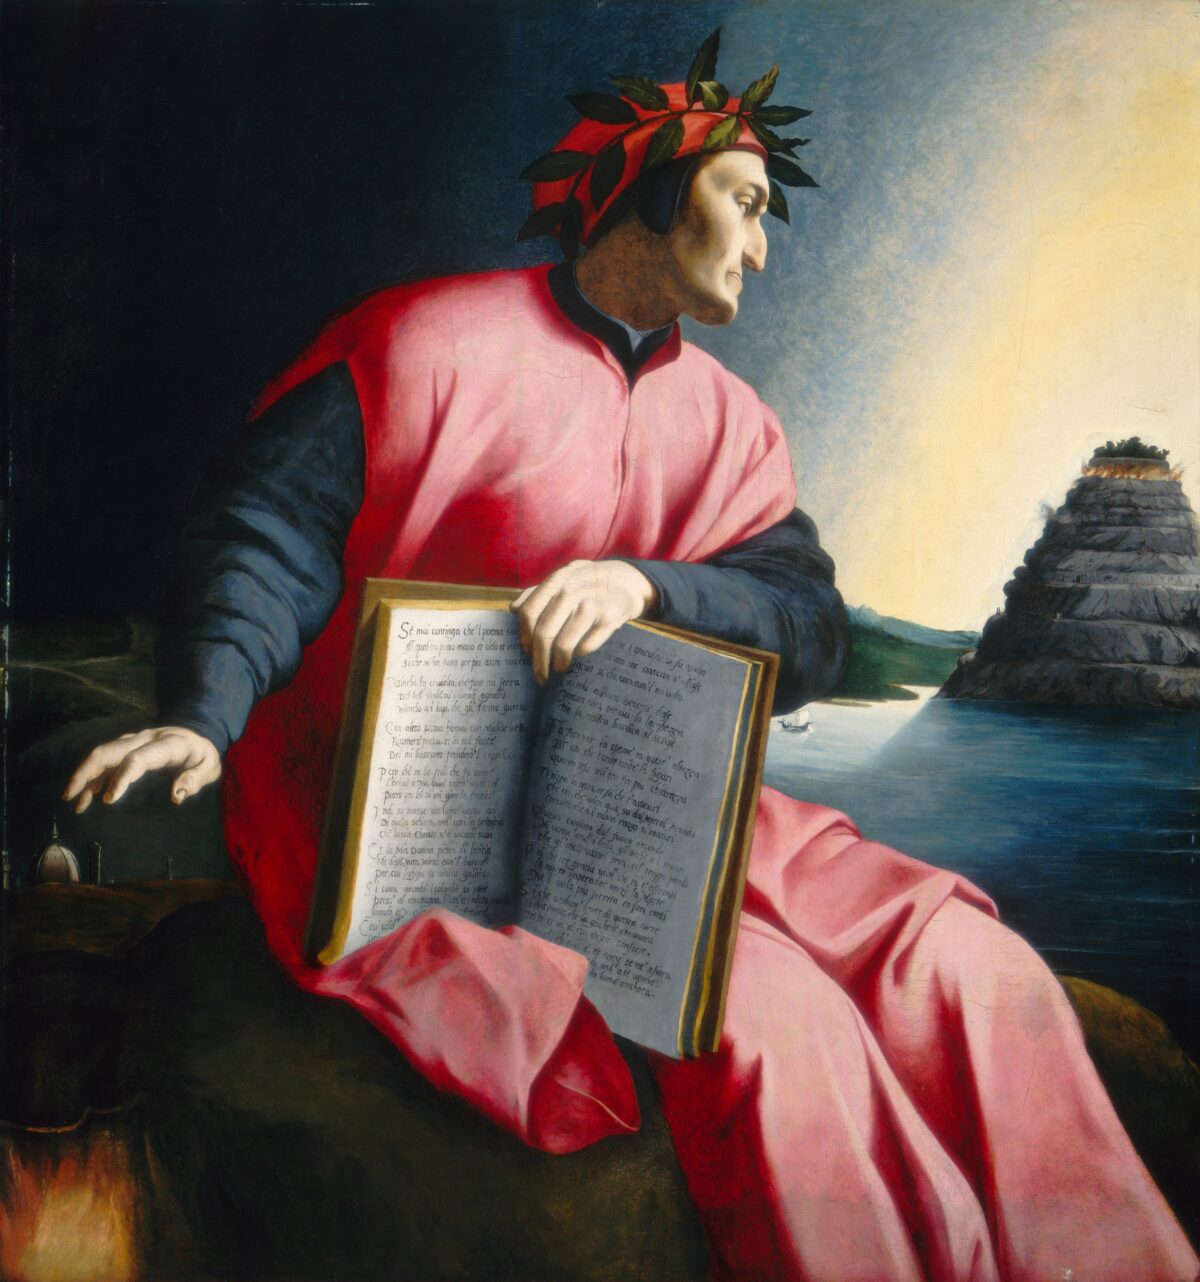 100 Days of Dante celebrates the master poet. Detail from an allegorical portrait of Dante Alighieri, late 16th century, by an unknown master. National Gallery of Art.  (Public Domain)